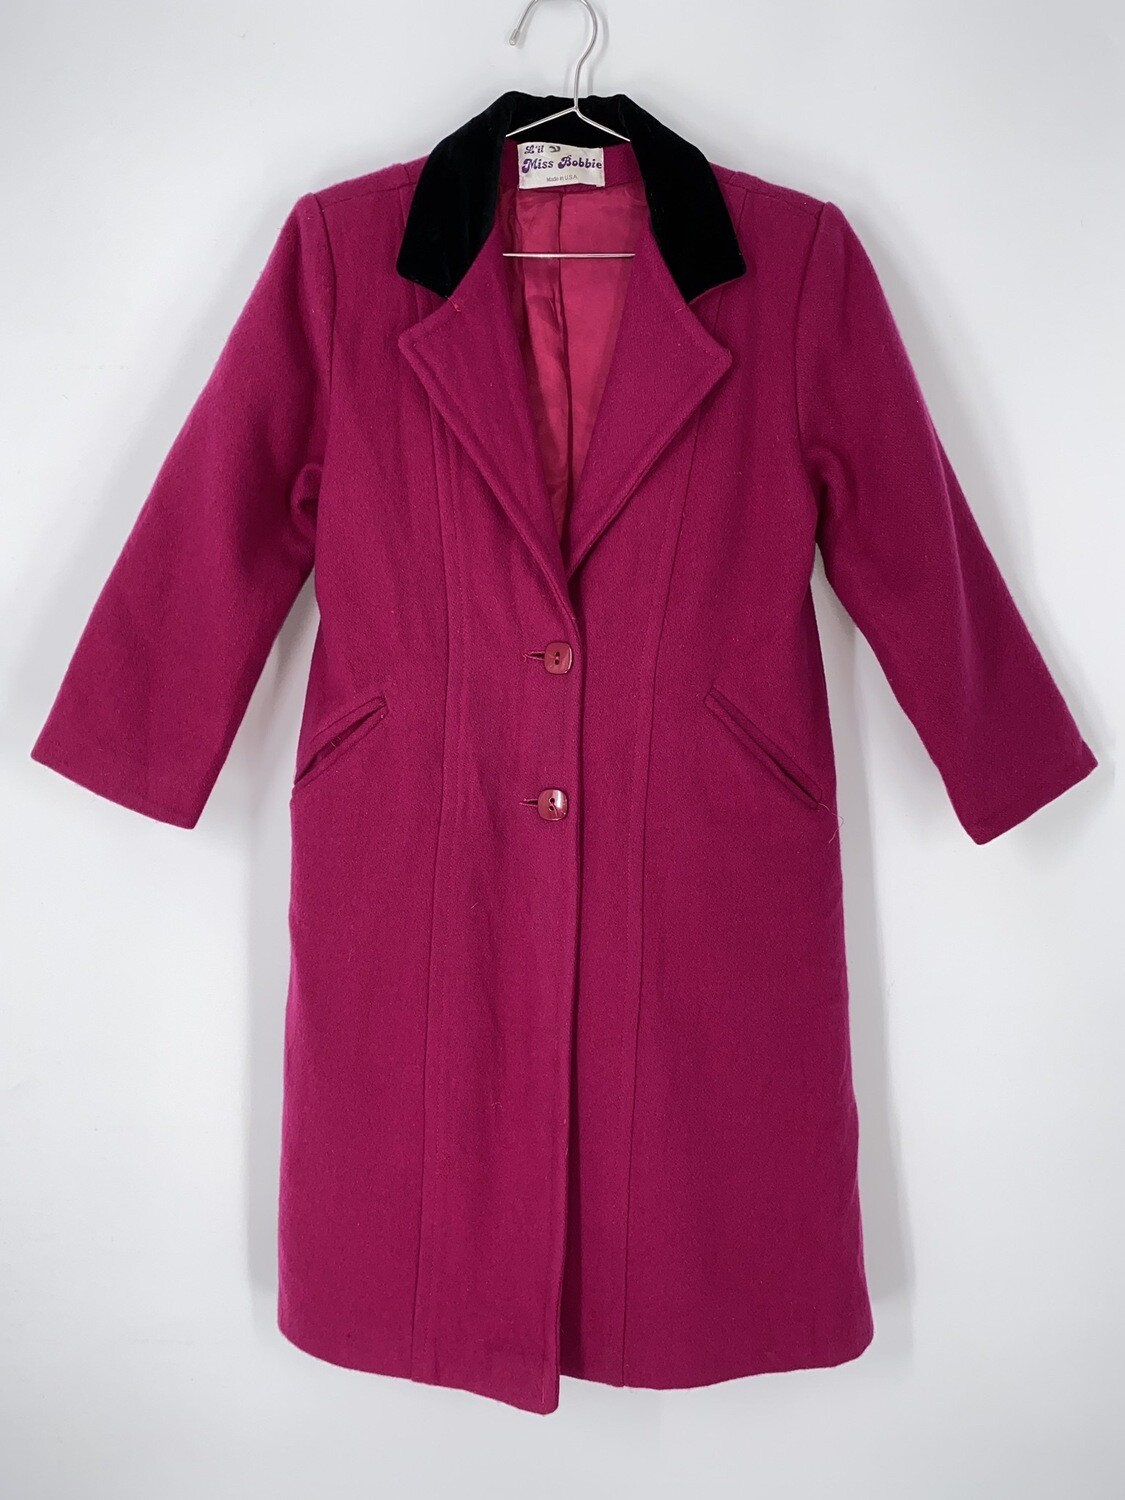 Miss Bobbie Pink Quarter Sleeve Trench Size